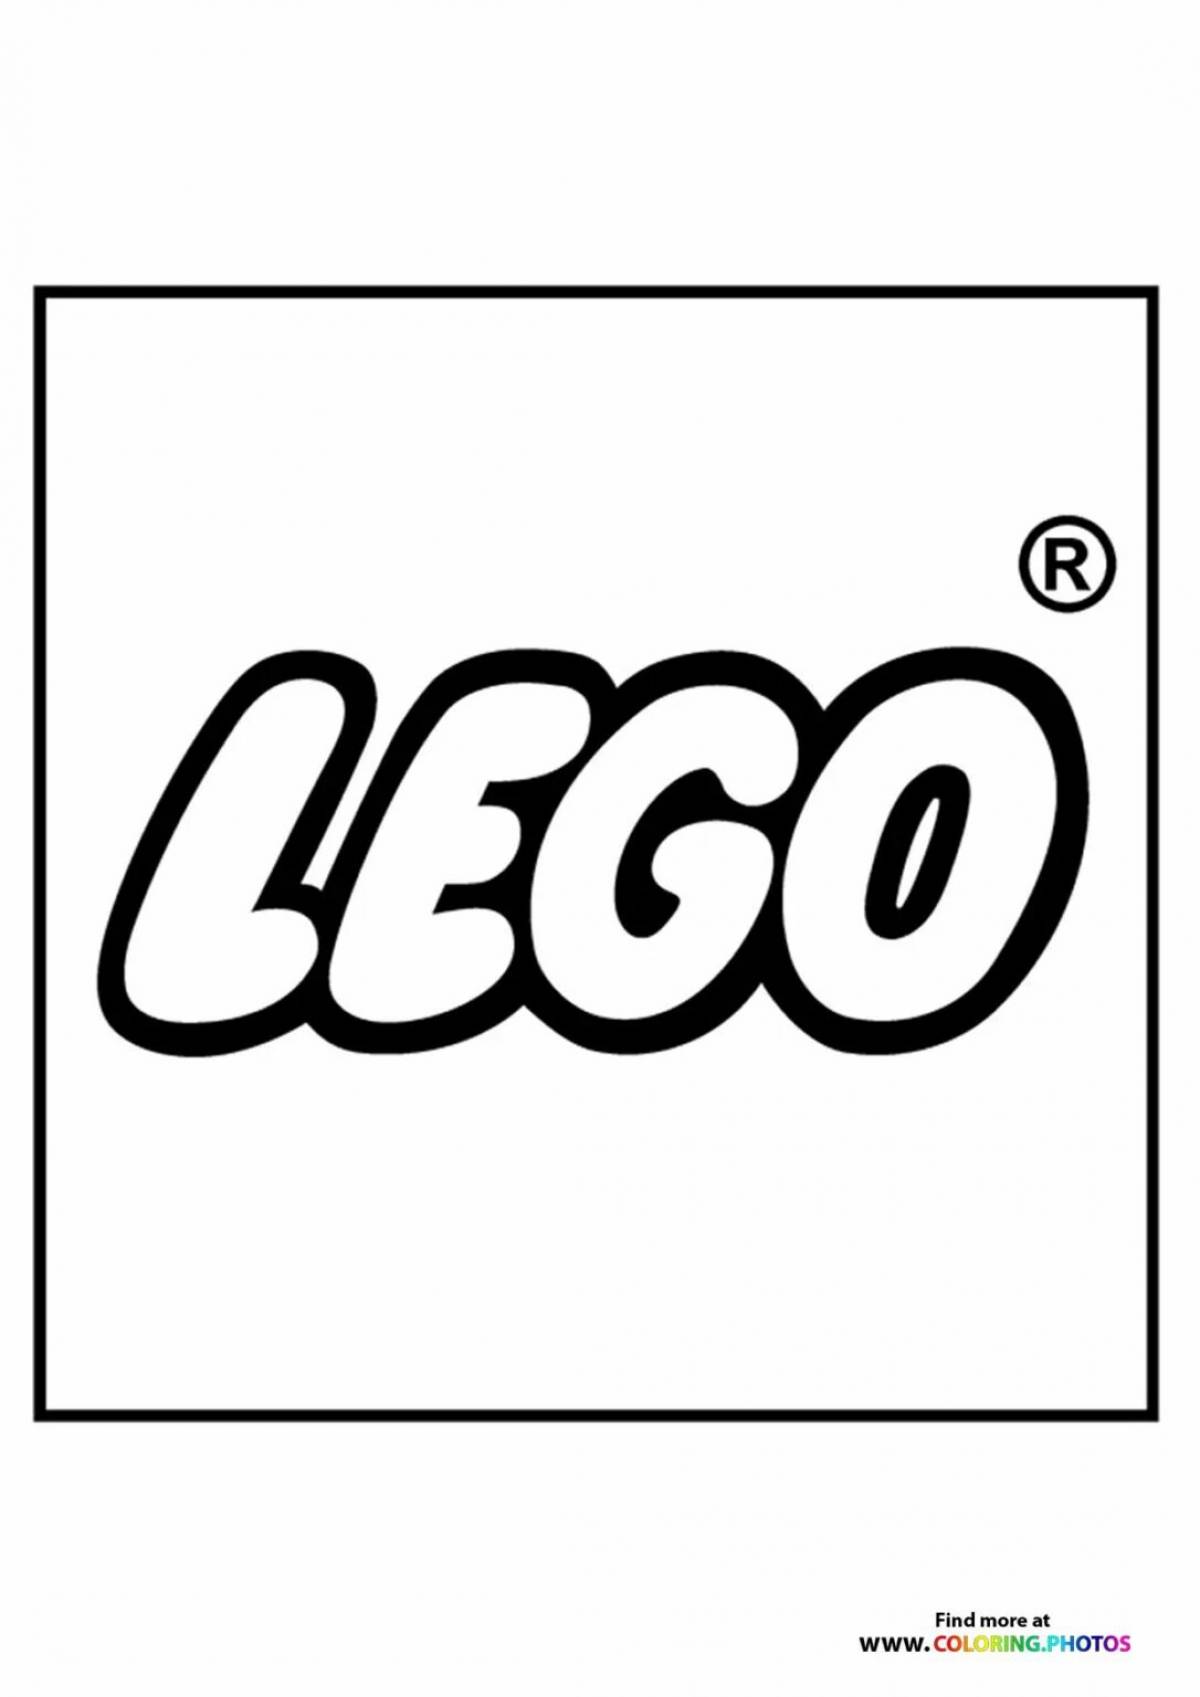 Amazing coloring page with lego logo